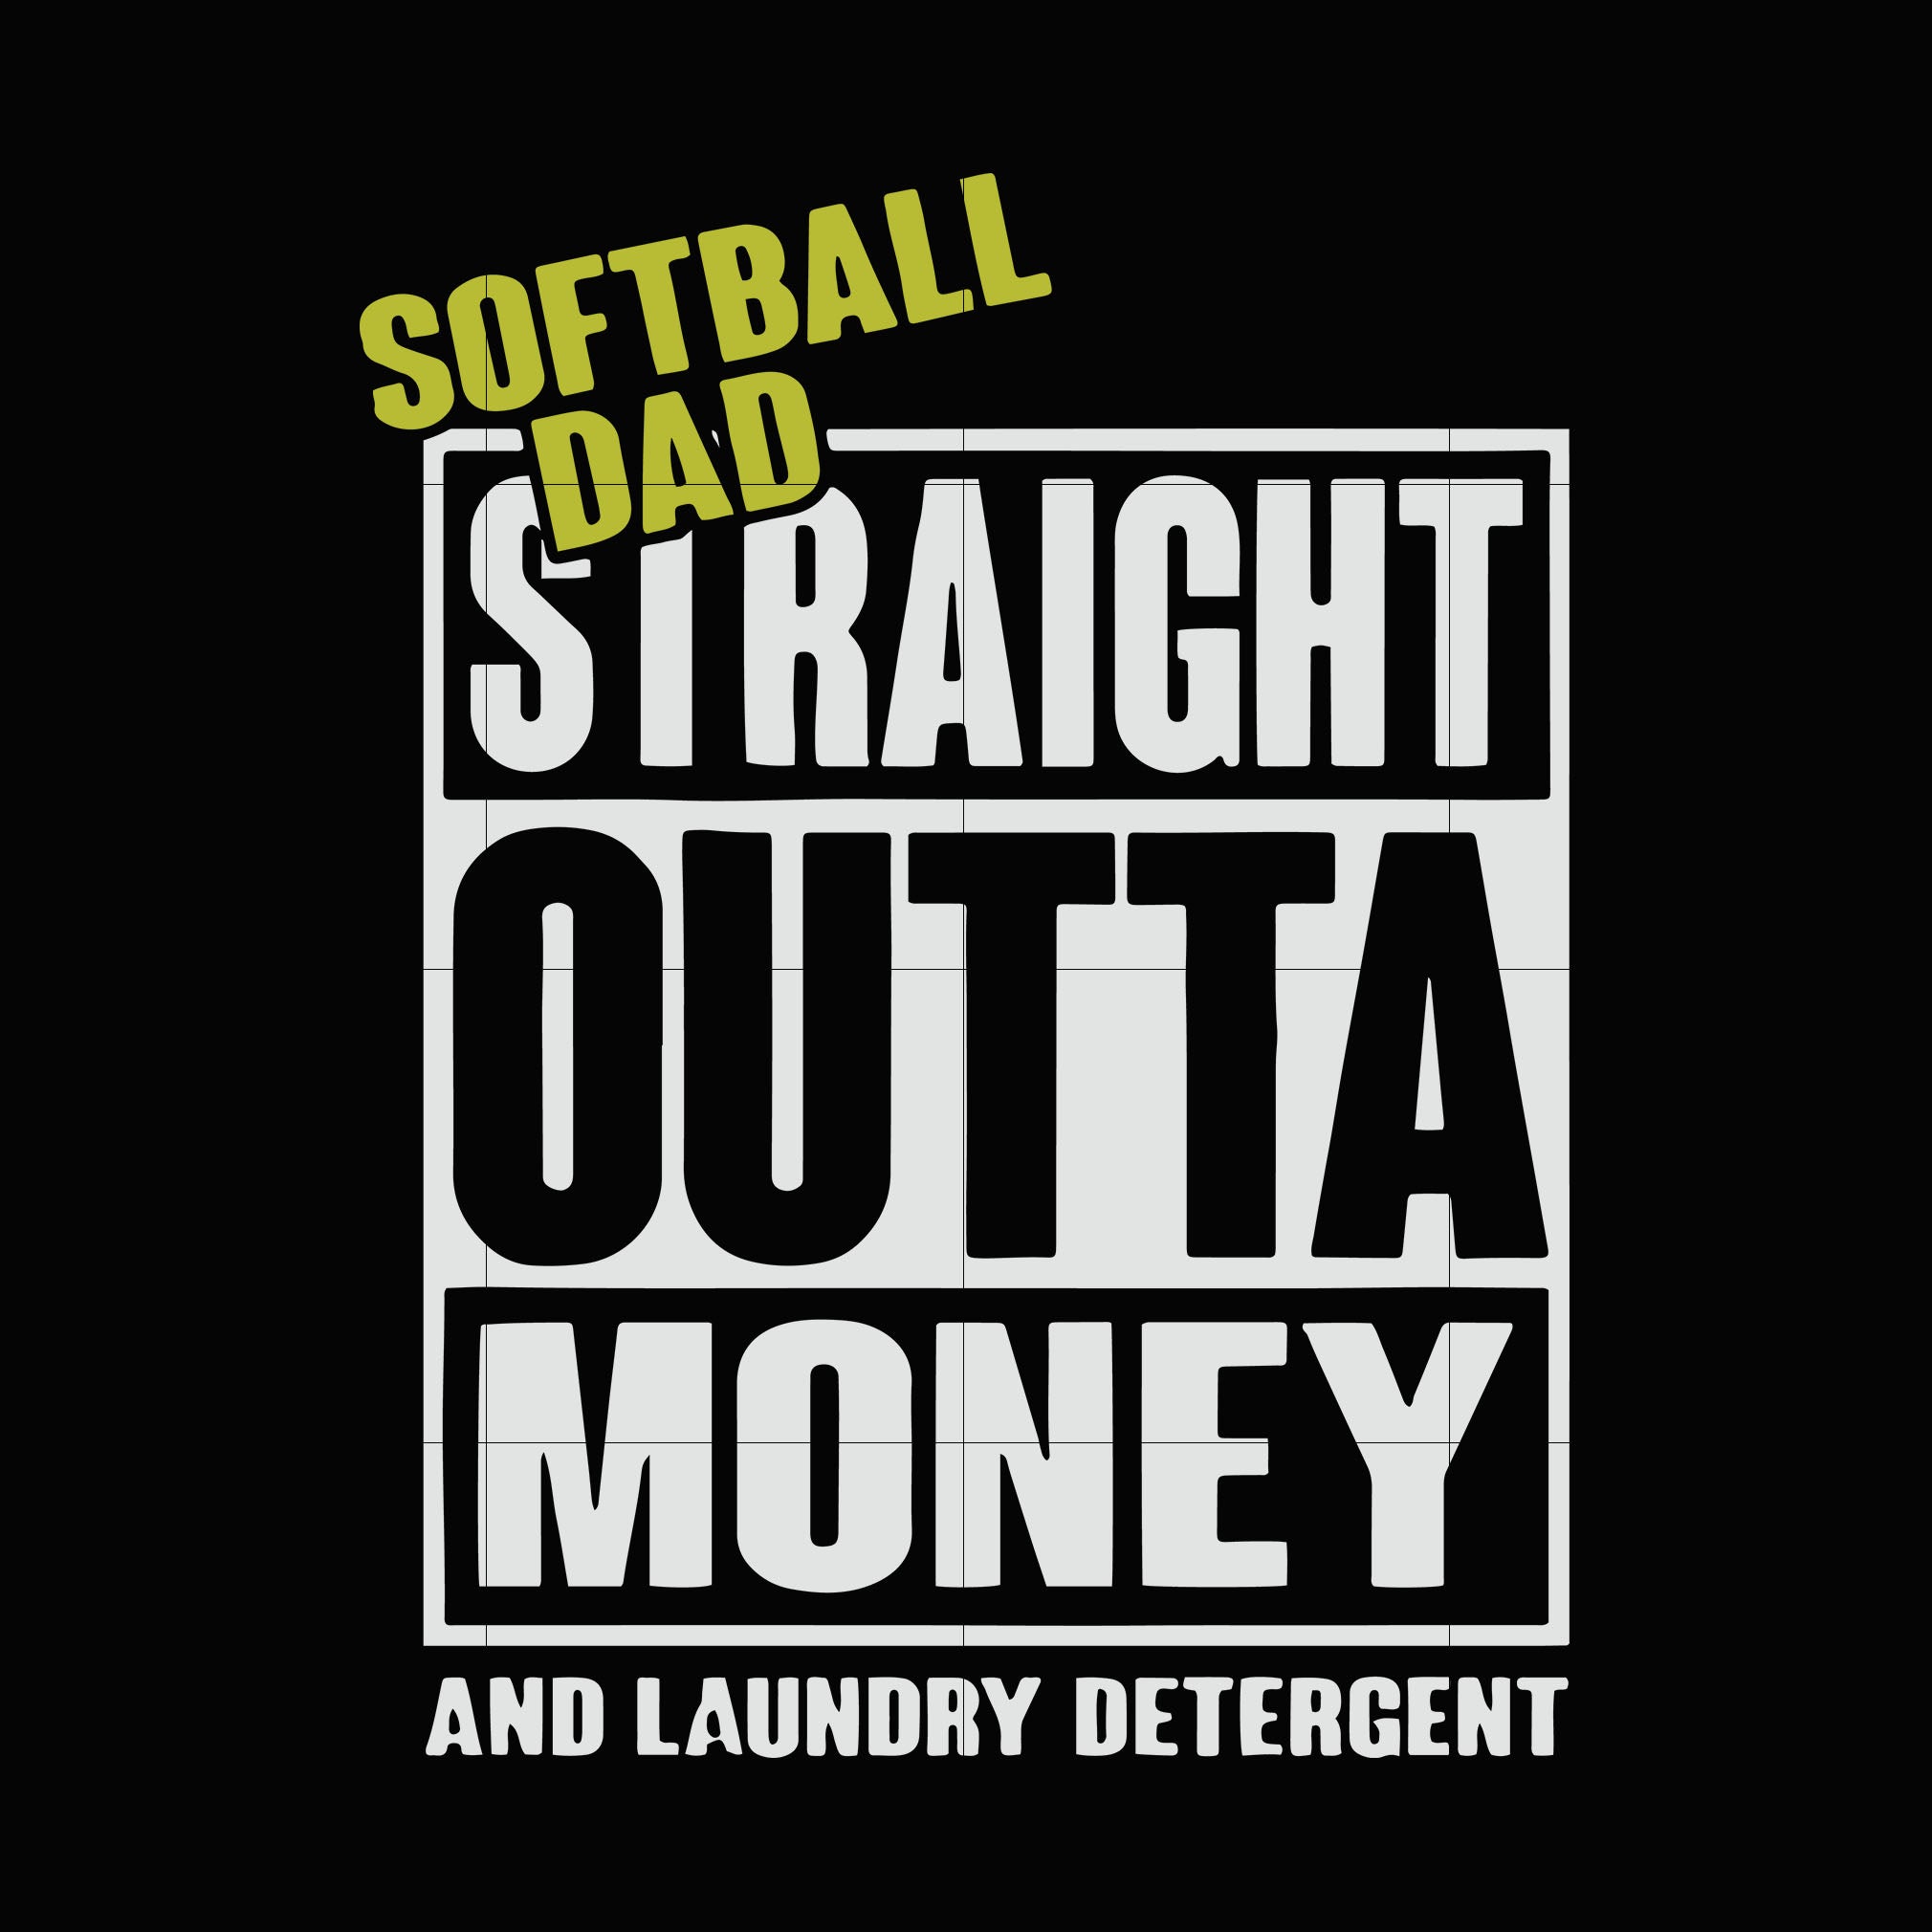 Download Softball Dad Straight Outta Money And Laundry Detercent Svg Dxf Eps Pn Svgtrending